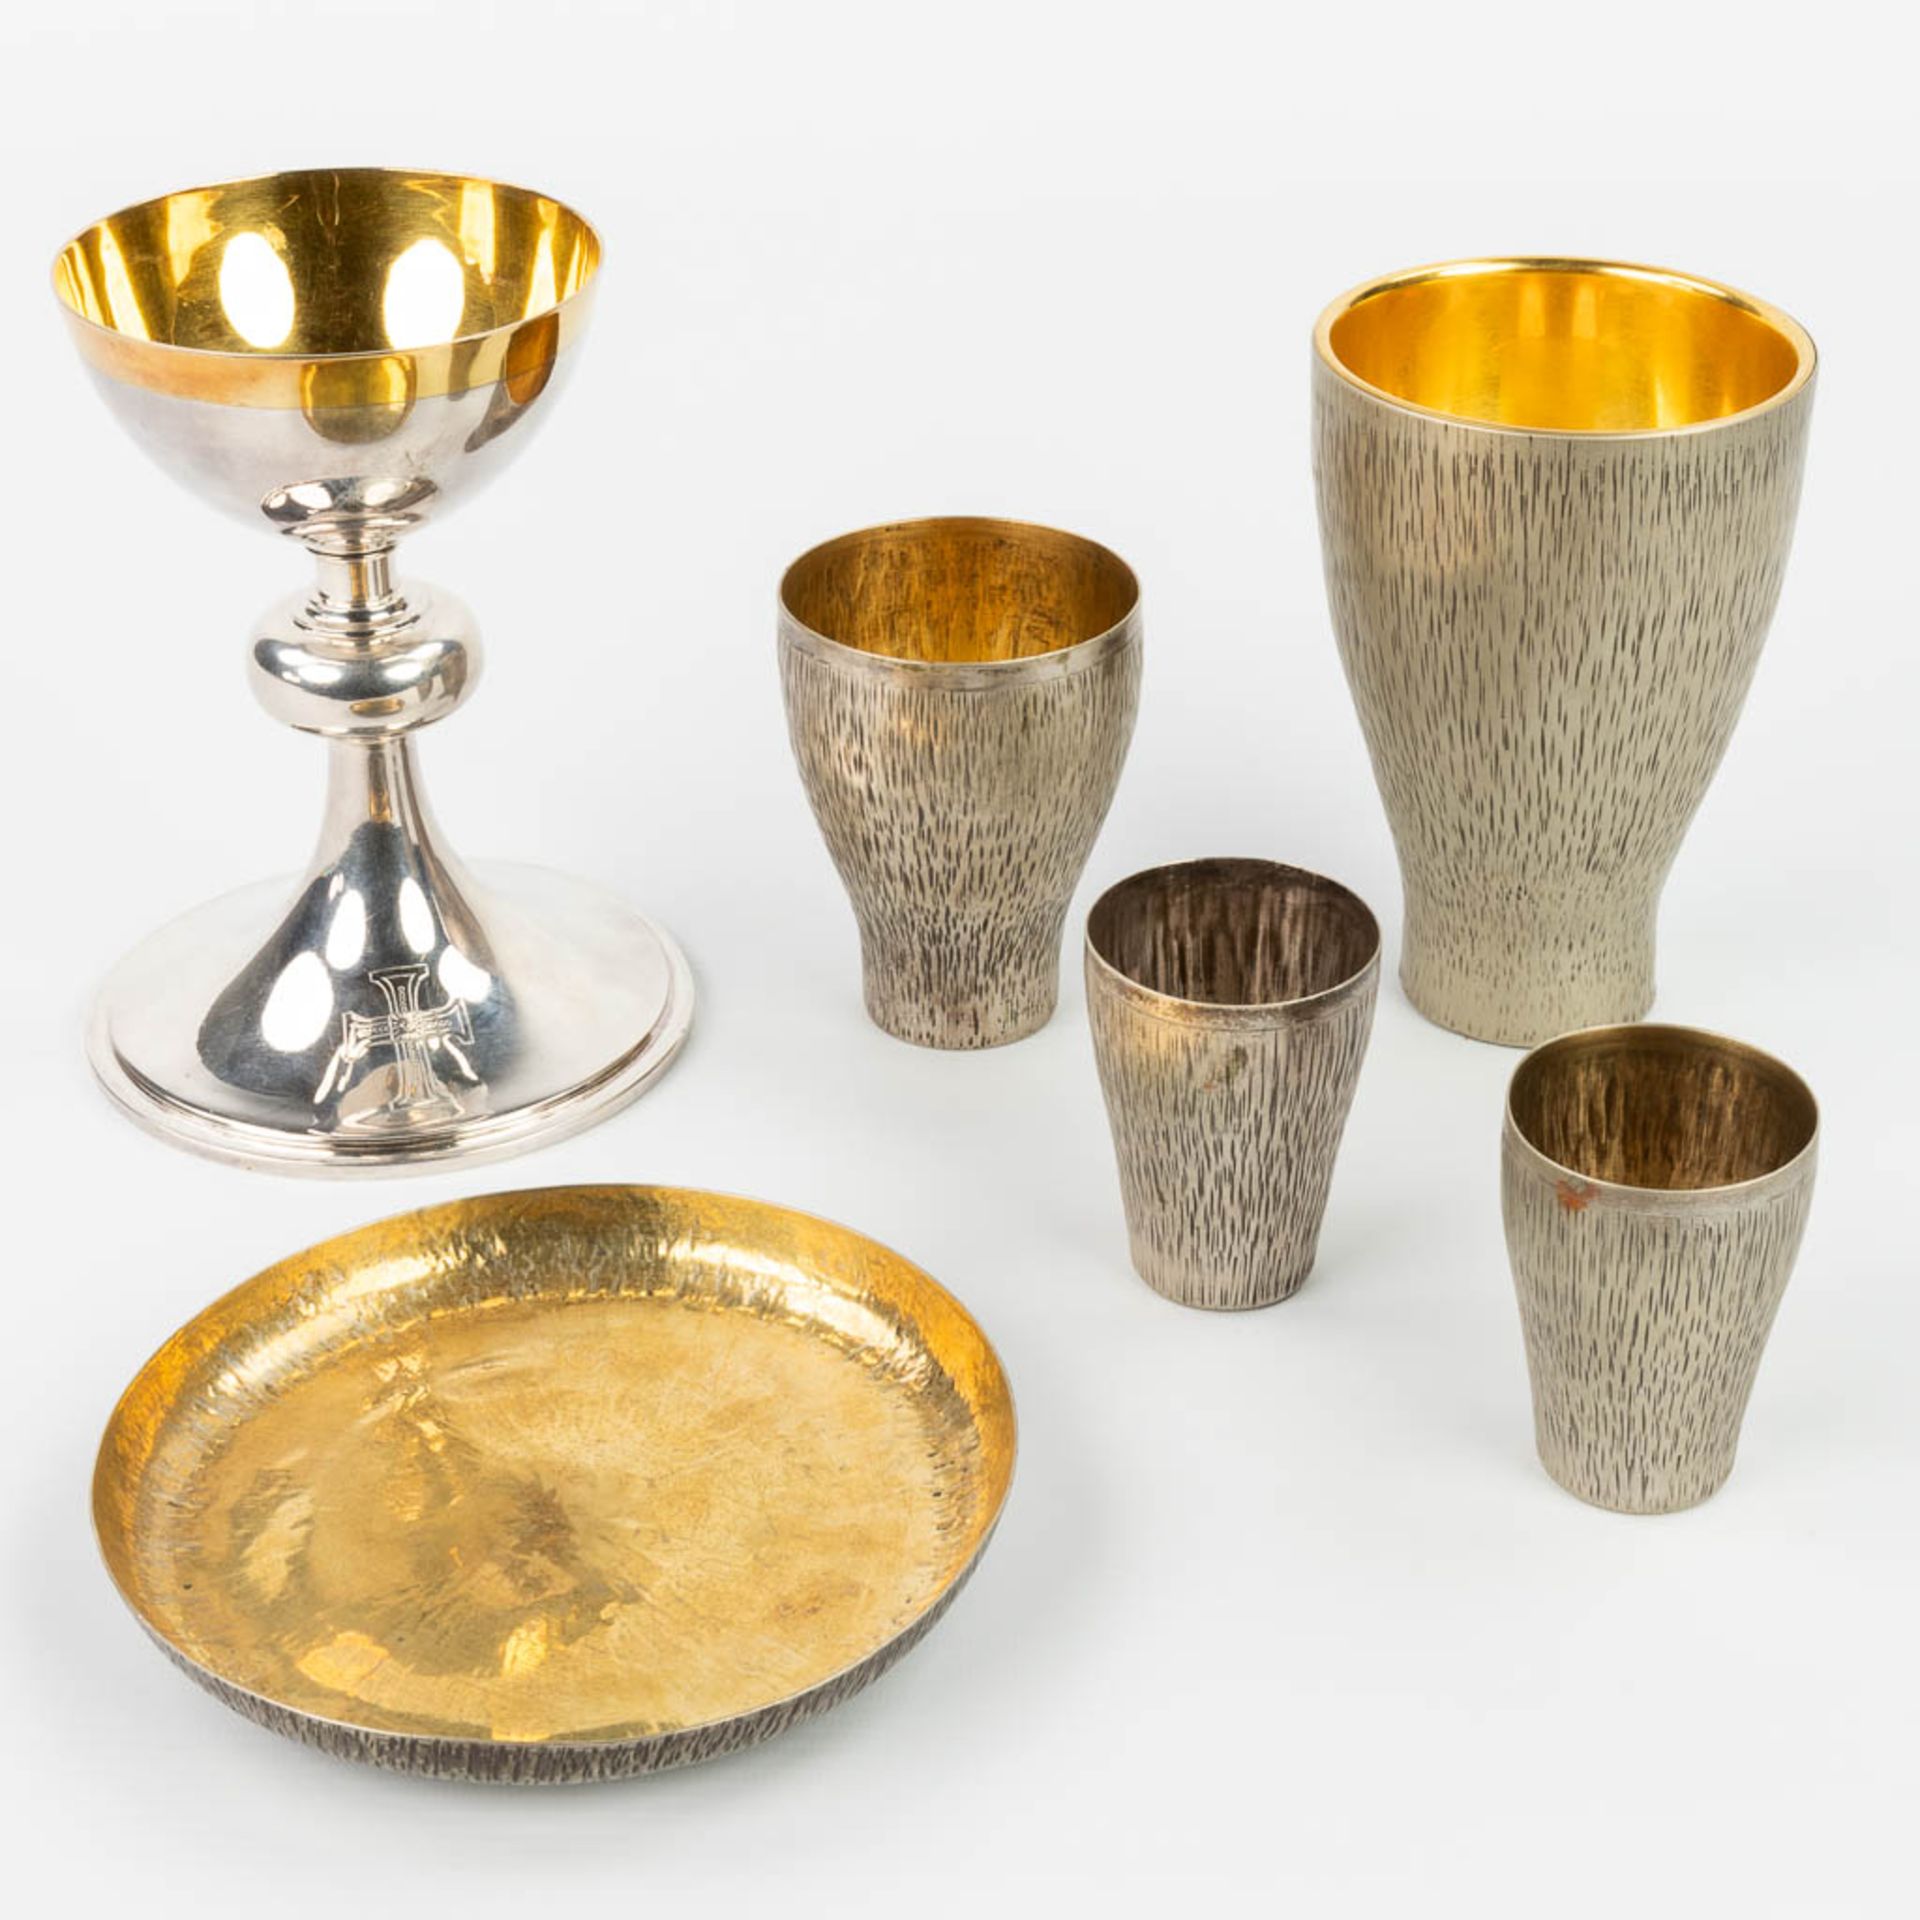 A chalice made of silver and marked Billaux Grossé, Brussels and 5 pieces of silver-plated Holy Mass